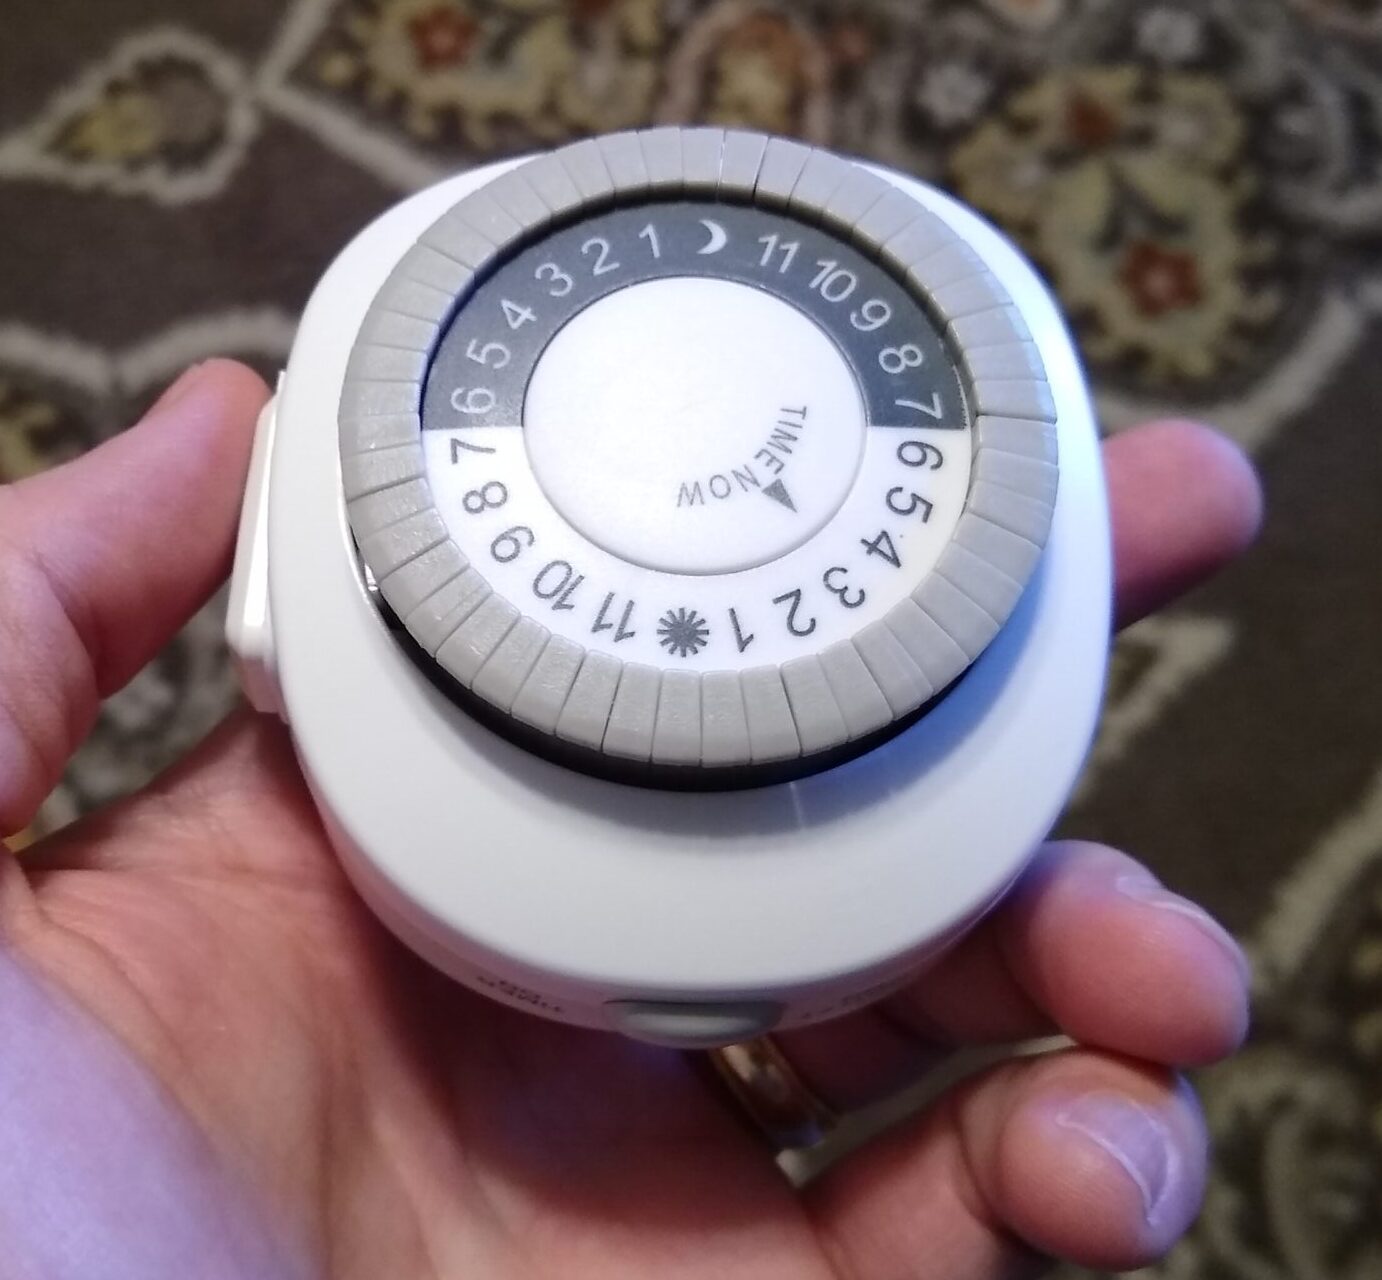 GE Indoor Mechanical Timer 24hr with 2 Outlets